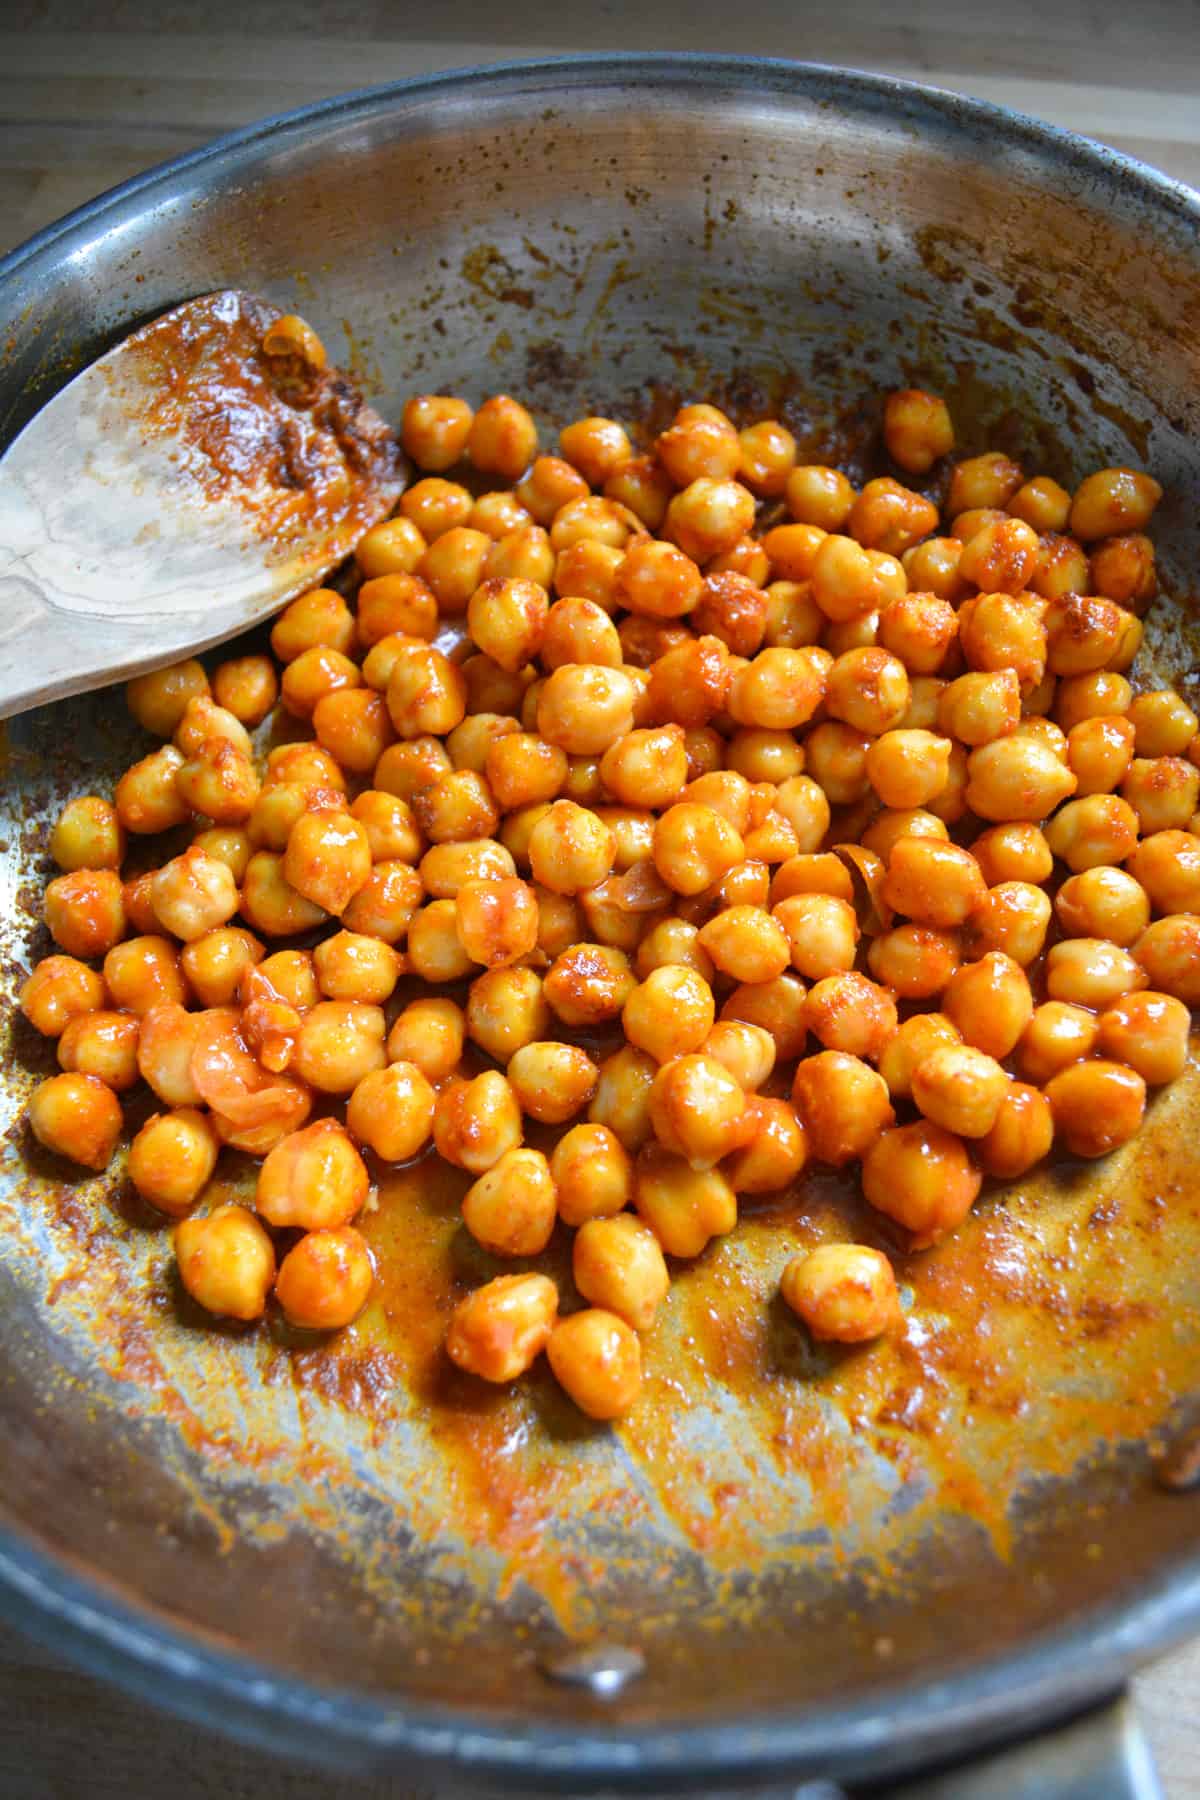 Buffalo chickpeas in a skillet.